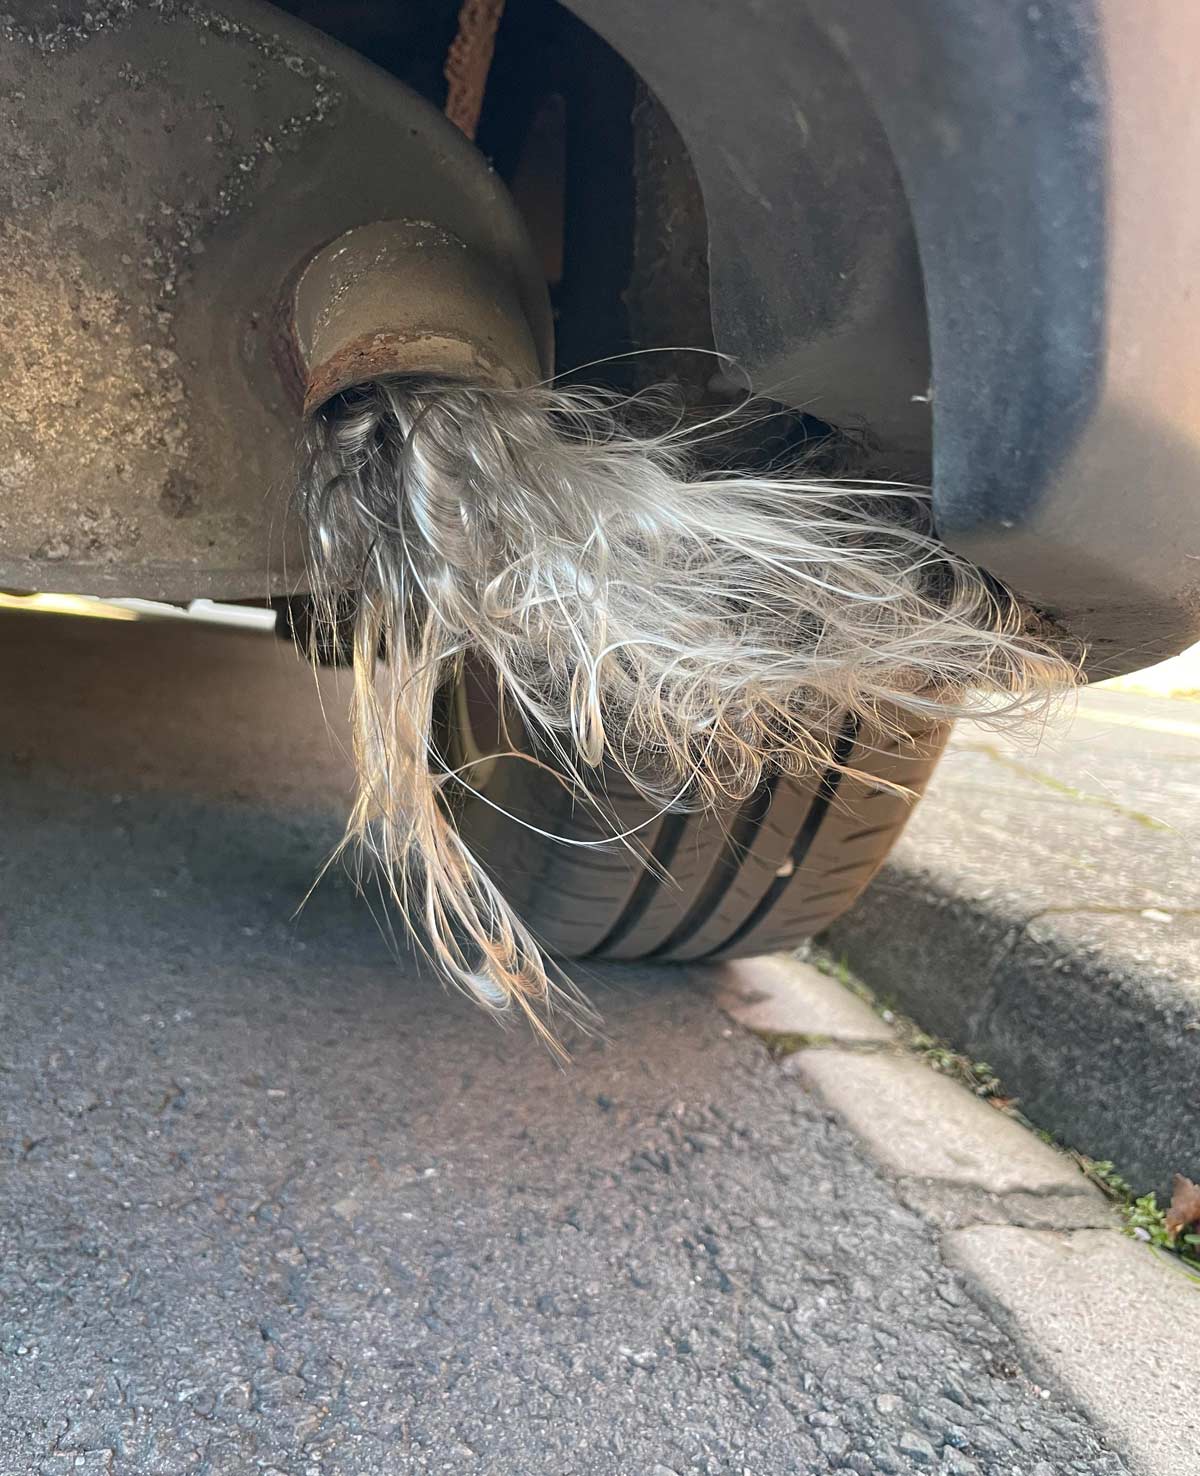 My exhaust pipe has sprouted a lovely silver wig